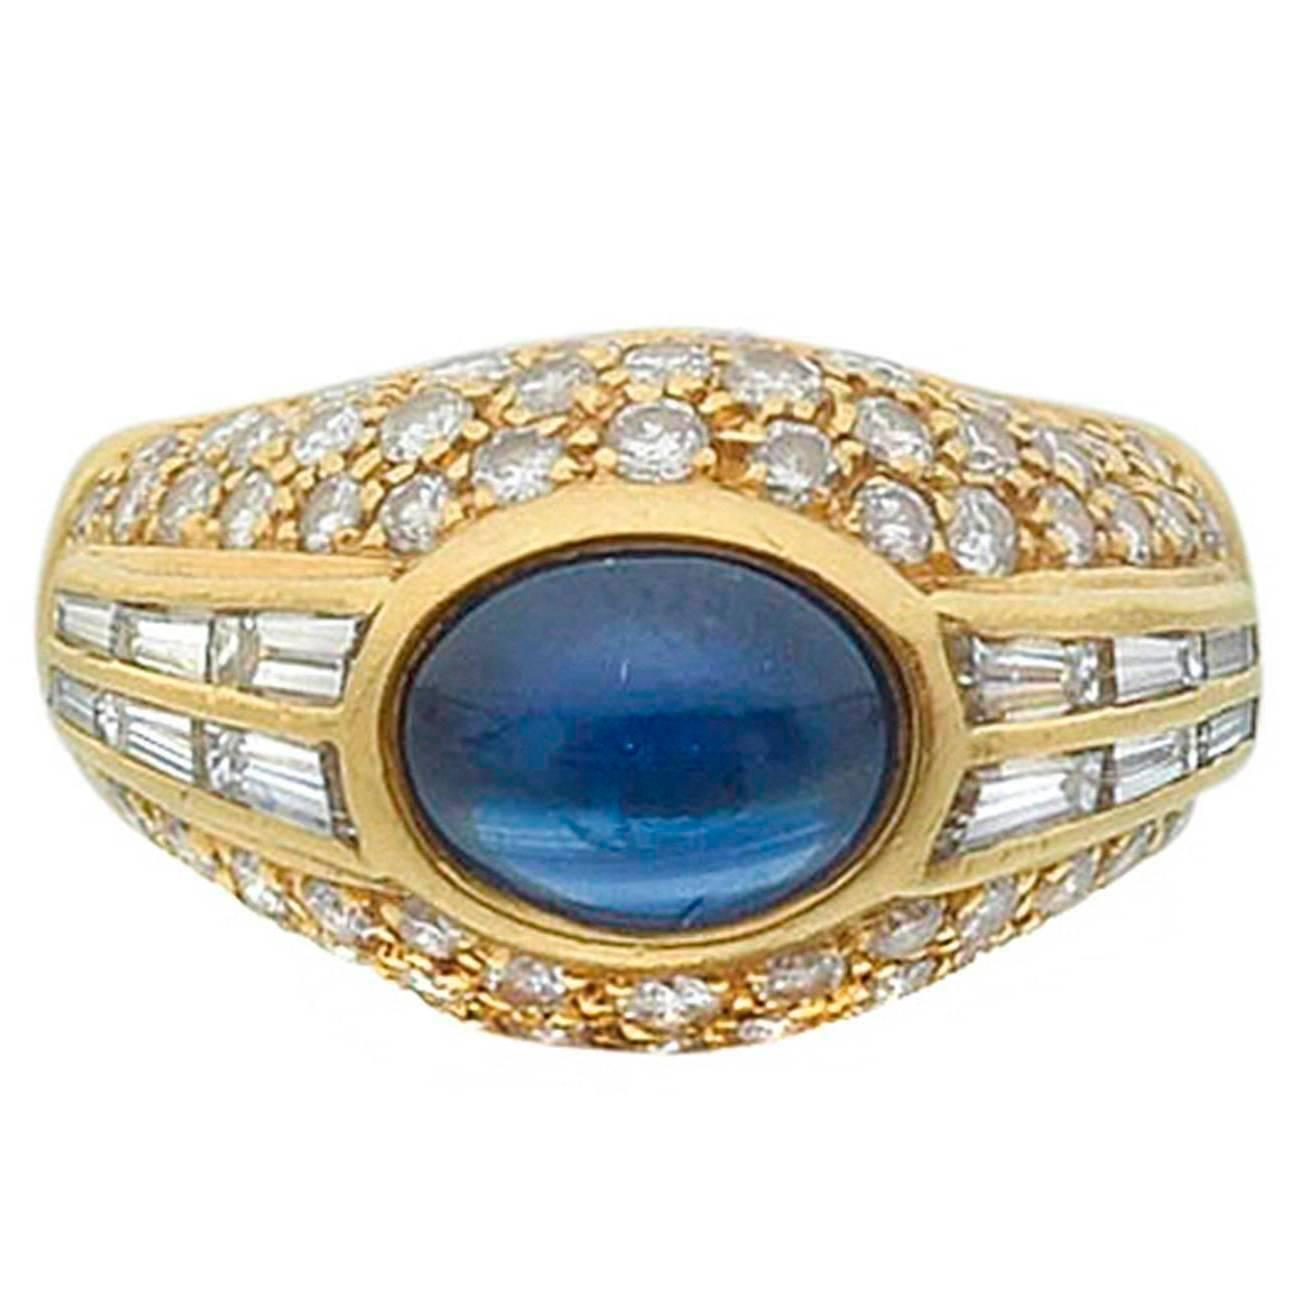 Cartier Sapphire Diamond Gold Gypsy Ring at 1stdibs